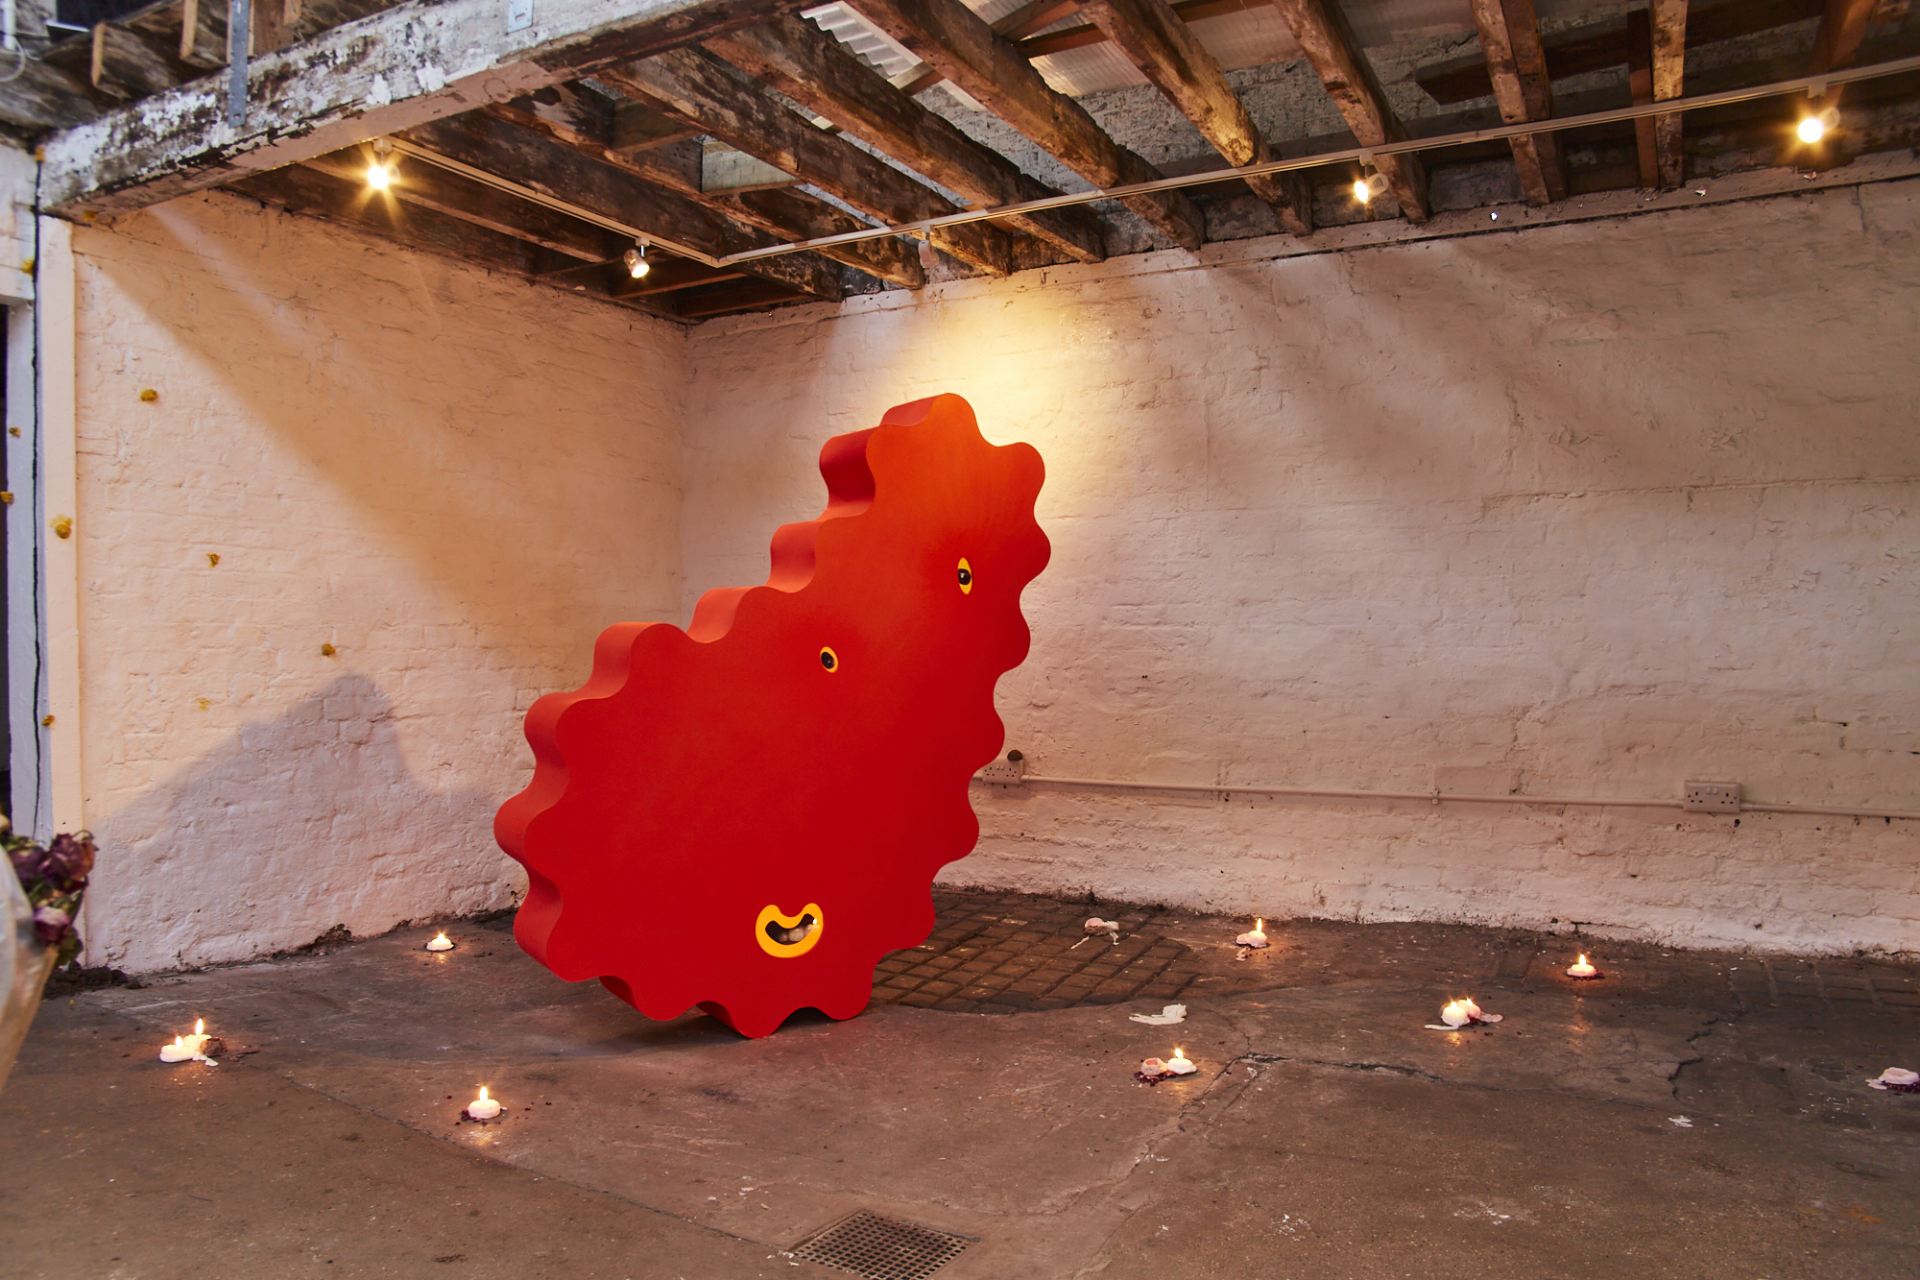 An image of an abstract red sculpture surrounded by candles on the floor of the room around it.